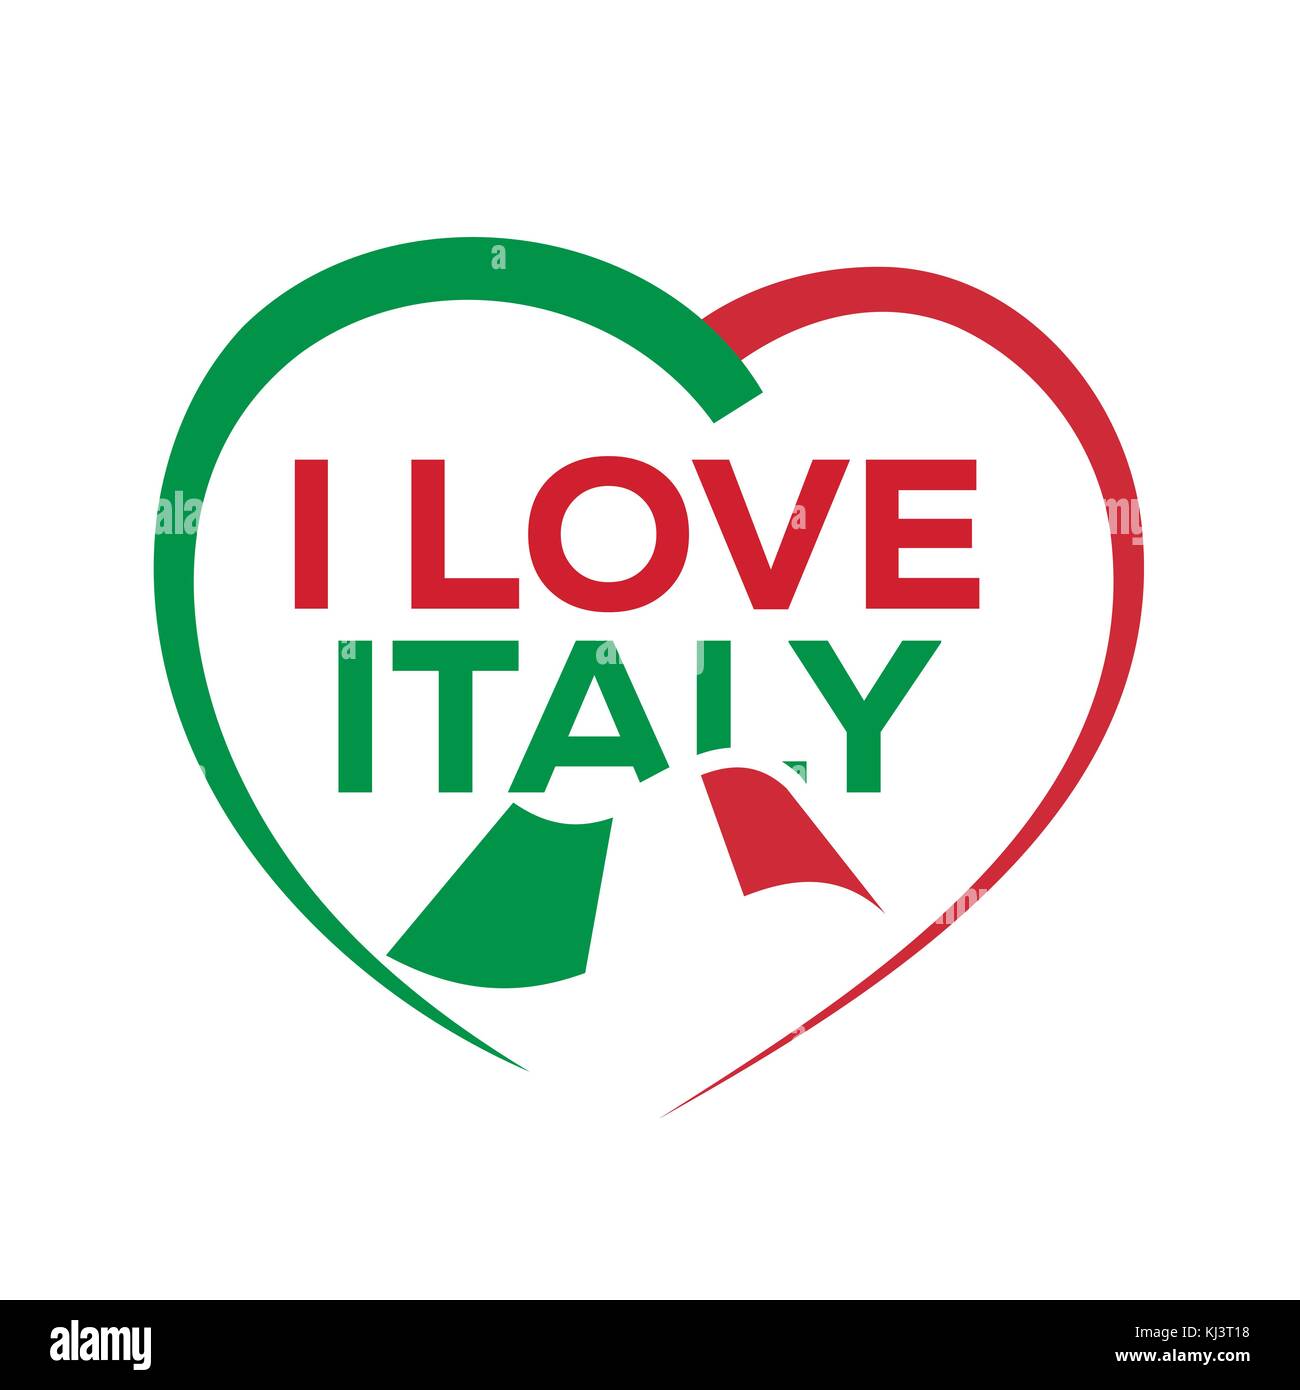 I love italy with outline of heart and italian flag, icon design ...